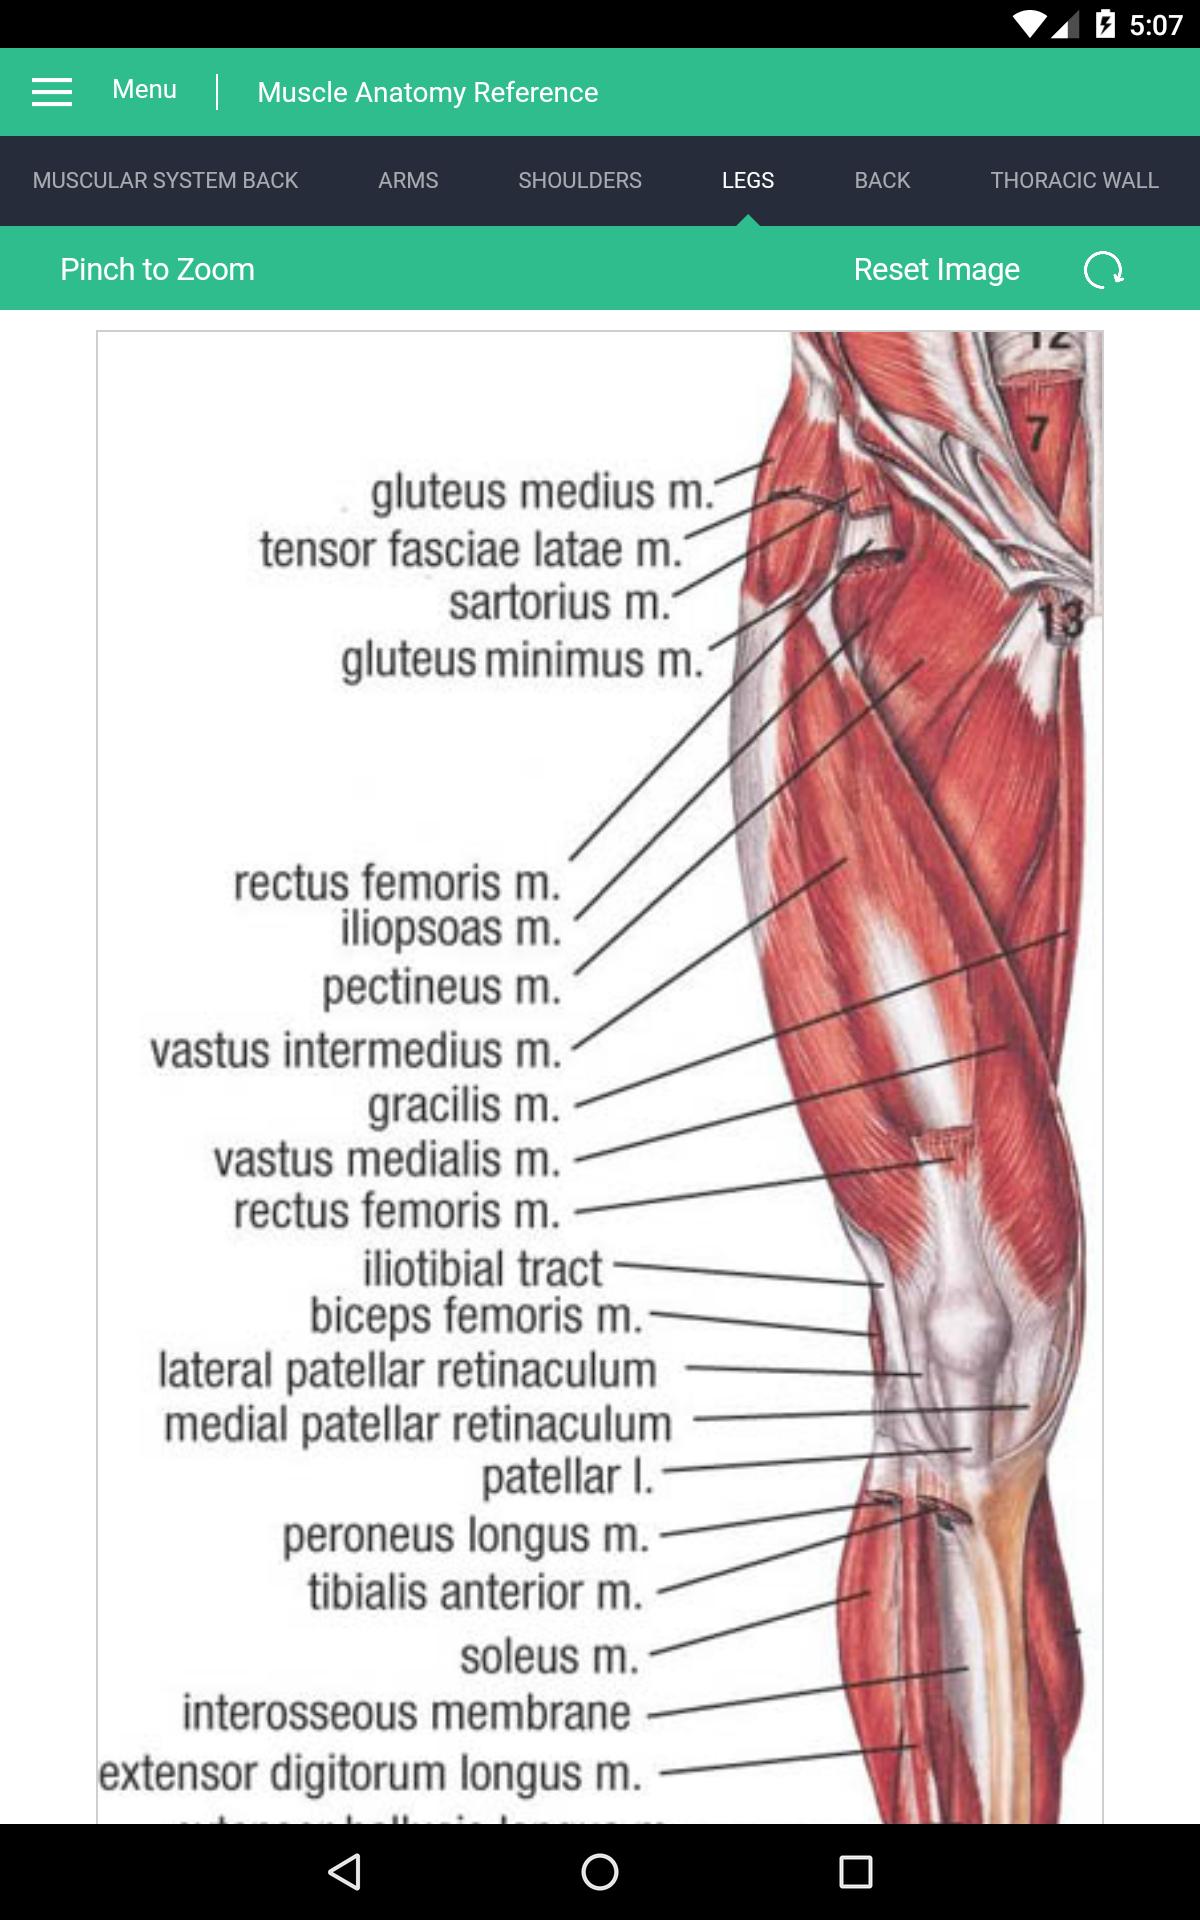 Back Muscles Anatomy Reference - Within this group of back muscles you